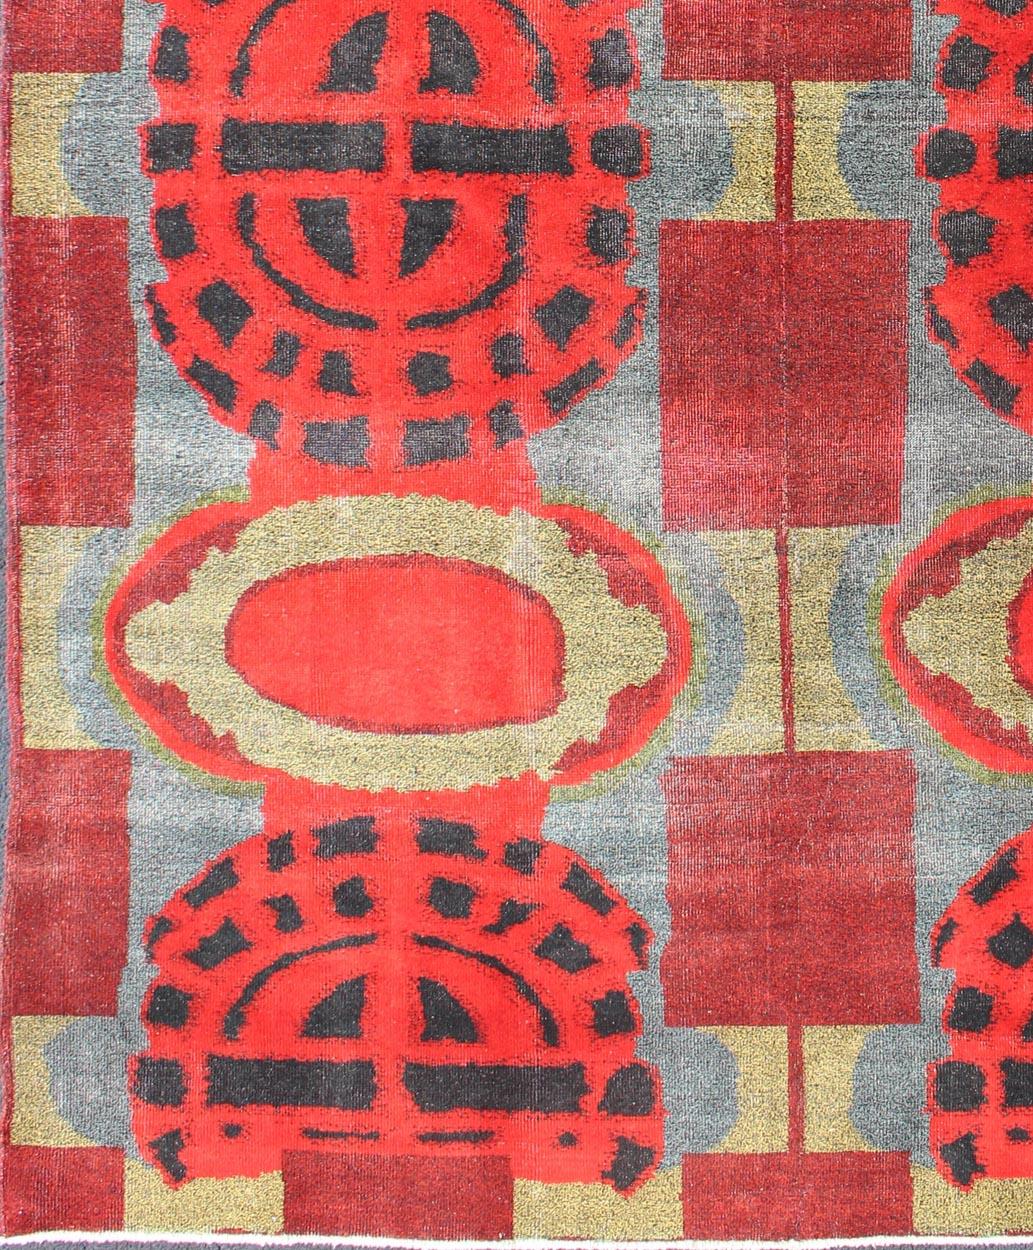 Graphic red-toned geometric design modern vintage Turkish rug, rug en-123914, country of origin or type: Turkey or Oushak, circa 1950.

This modern-design vintage Turkish Oushak rug features a bold and colorful red geometric design set atop a